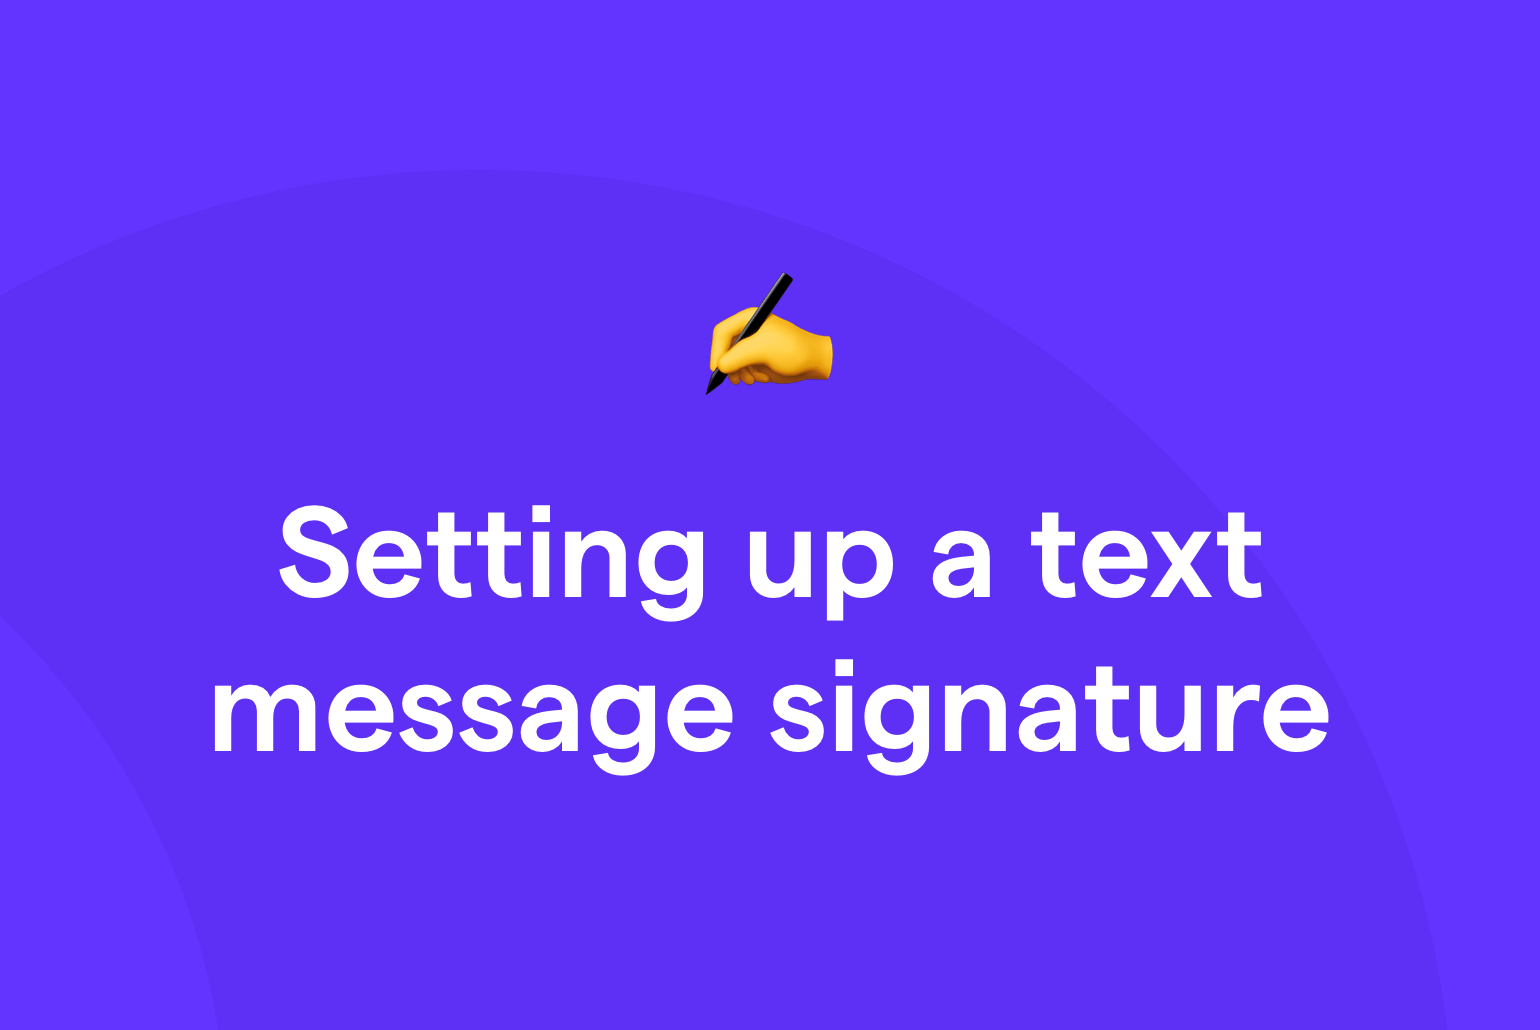 Setting up a text message signature